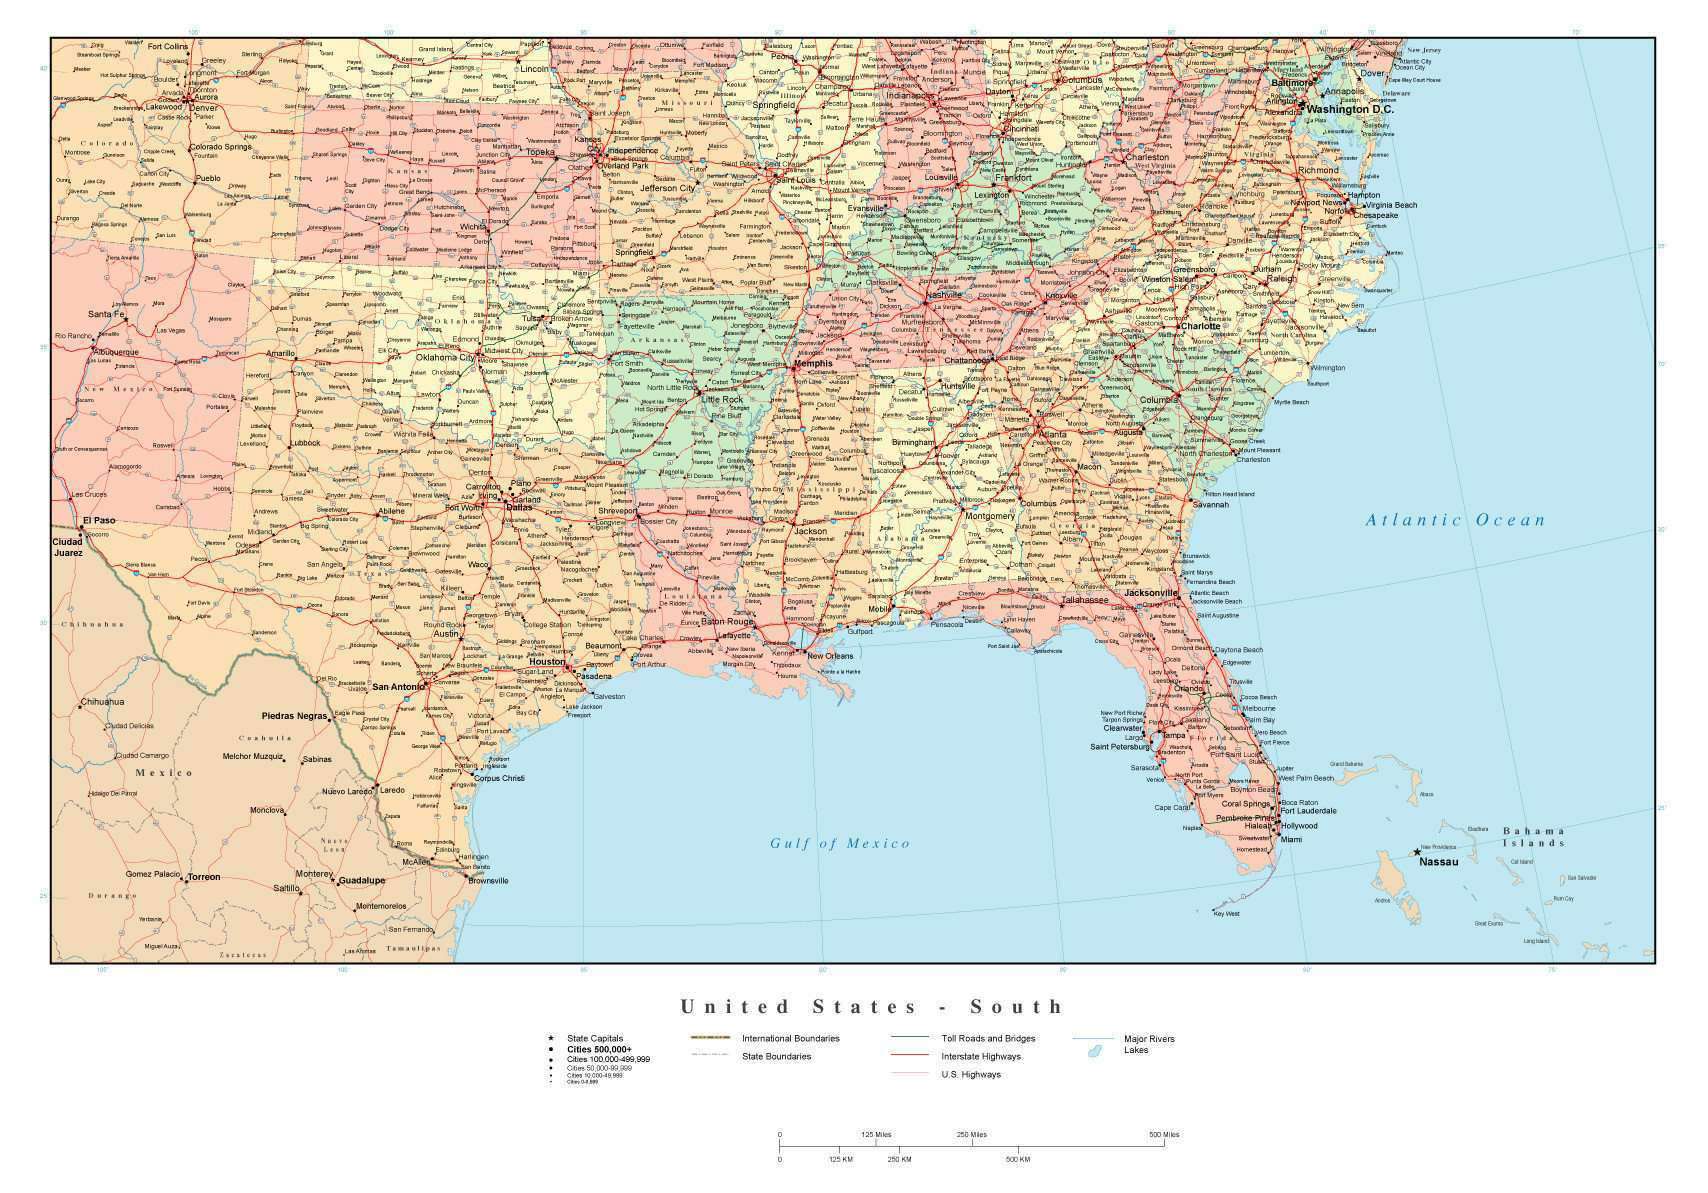 USA South Region Map with State Boundaries, Highways, and Cities